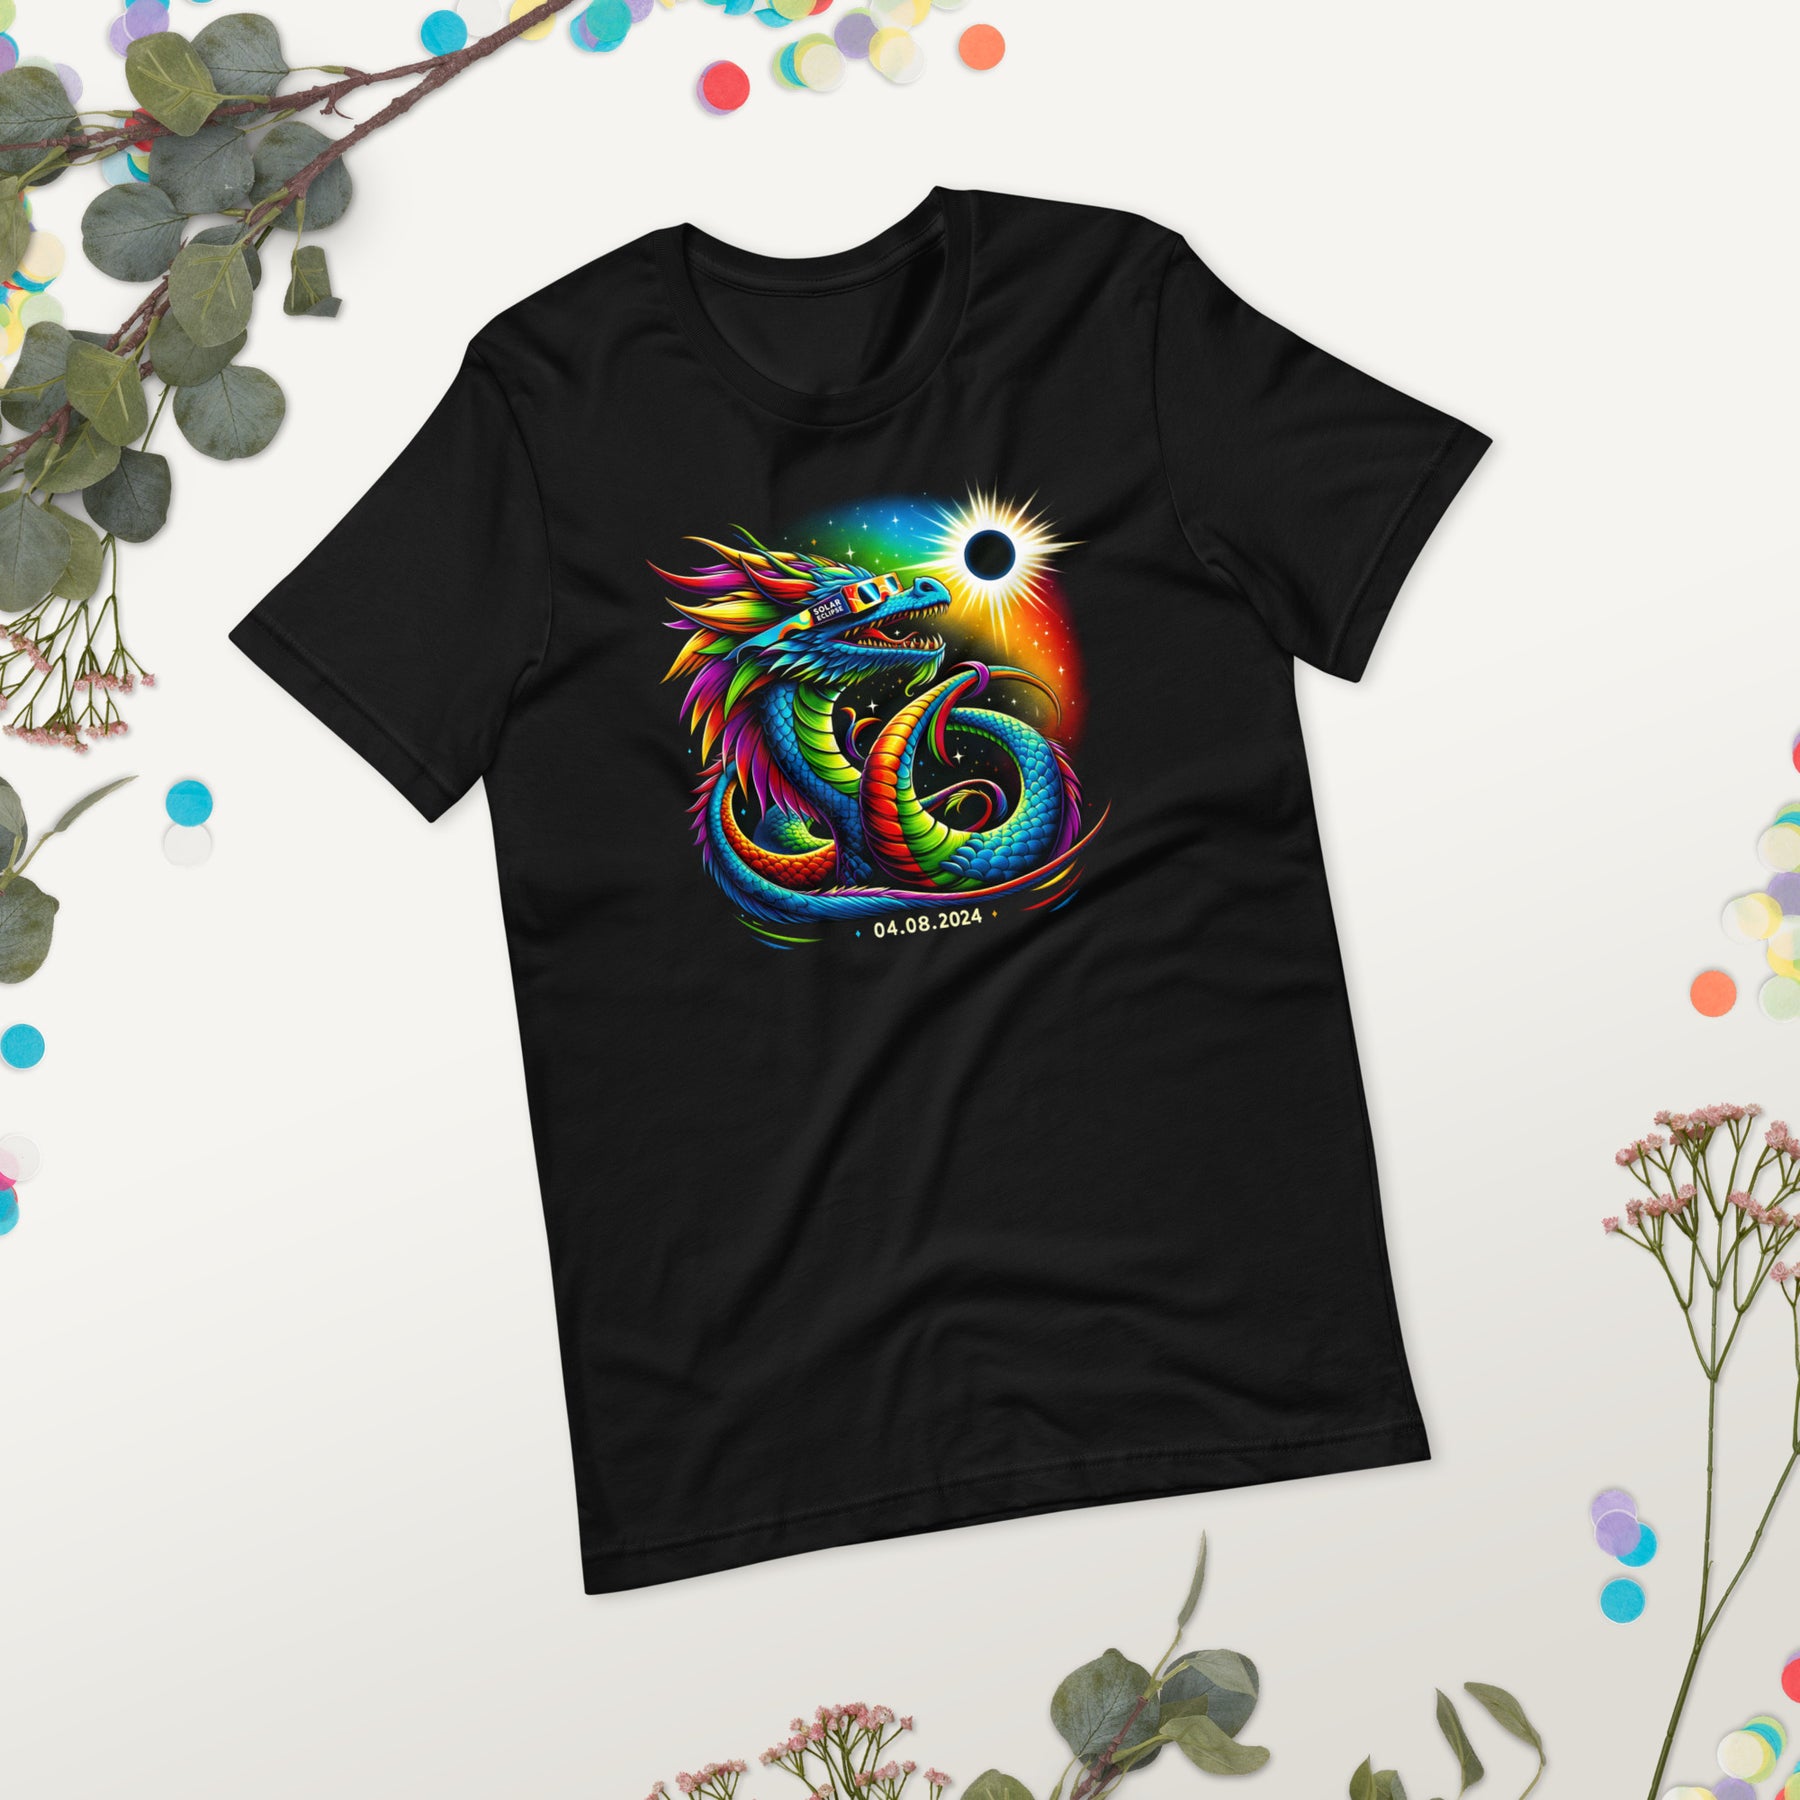 Funny Solar Eclipse Dragon Shirt, Colorful 04.08.2024 Totality Souvenir Tee, Astronomy Gift for Dragon Lovers, Total Solar Eclipse 2024 Apparel